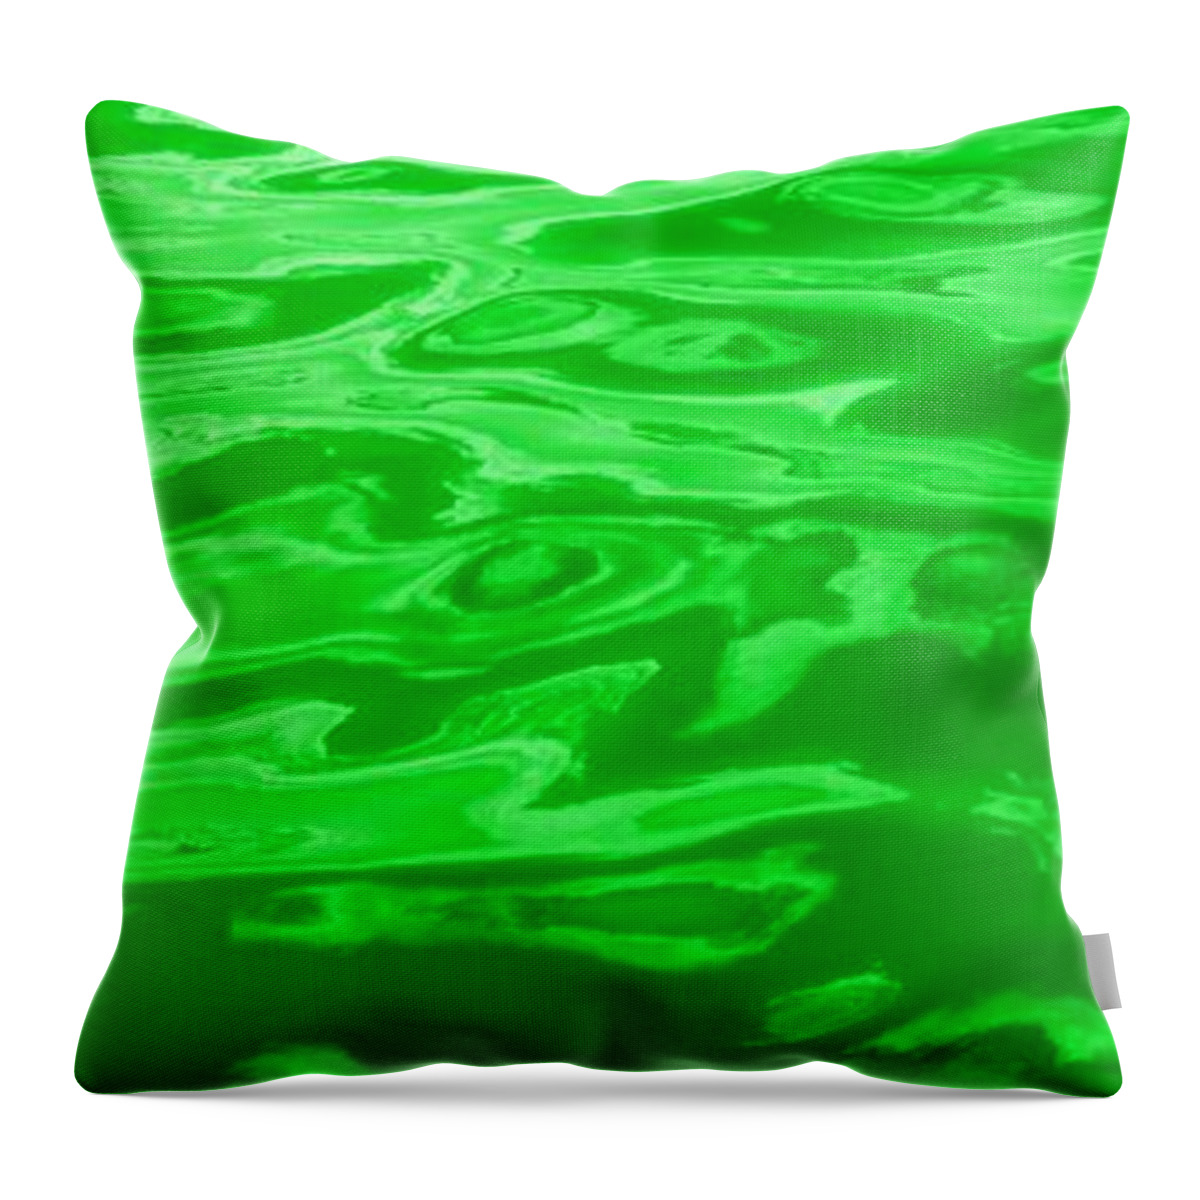 Wall Art Throw Pillow featuring the photograph Colored Wave Long Green by Stephen Jorgensen